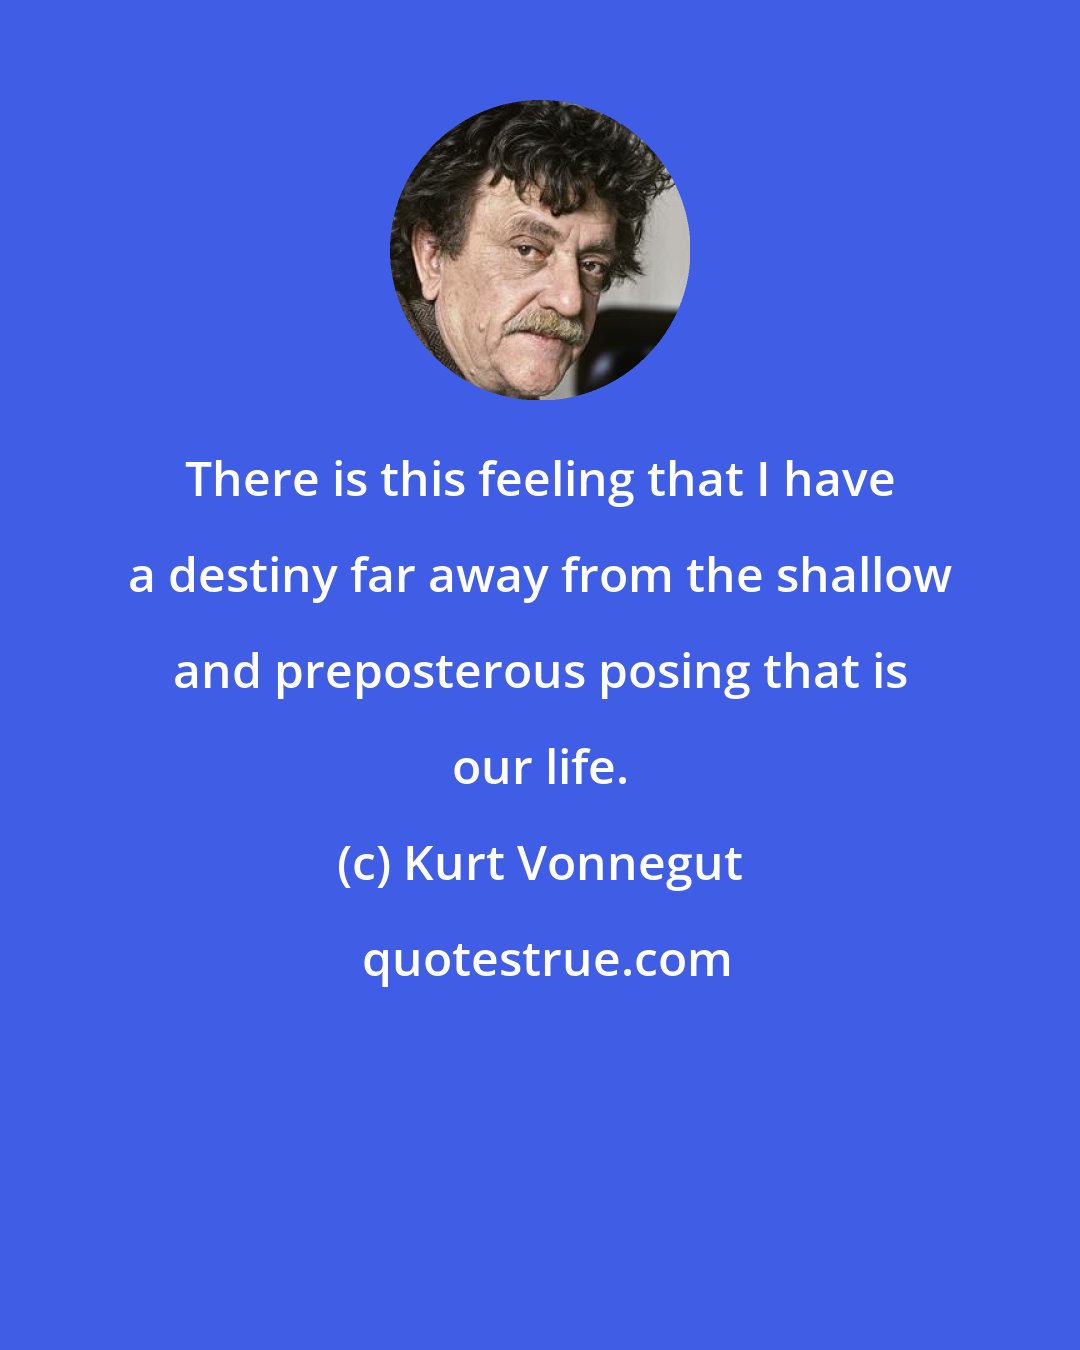 Kurt Vonnegut: There is this feeling that I have a destiny far away from the shallow and preposterous posing that is our life.